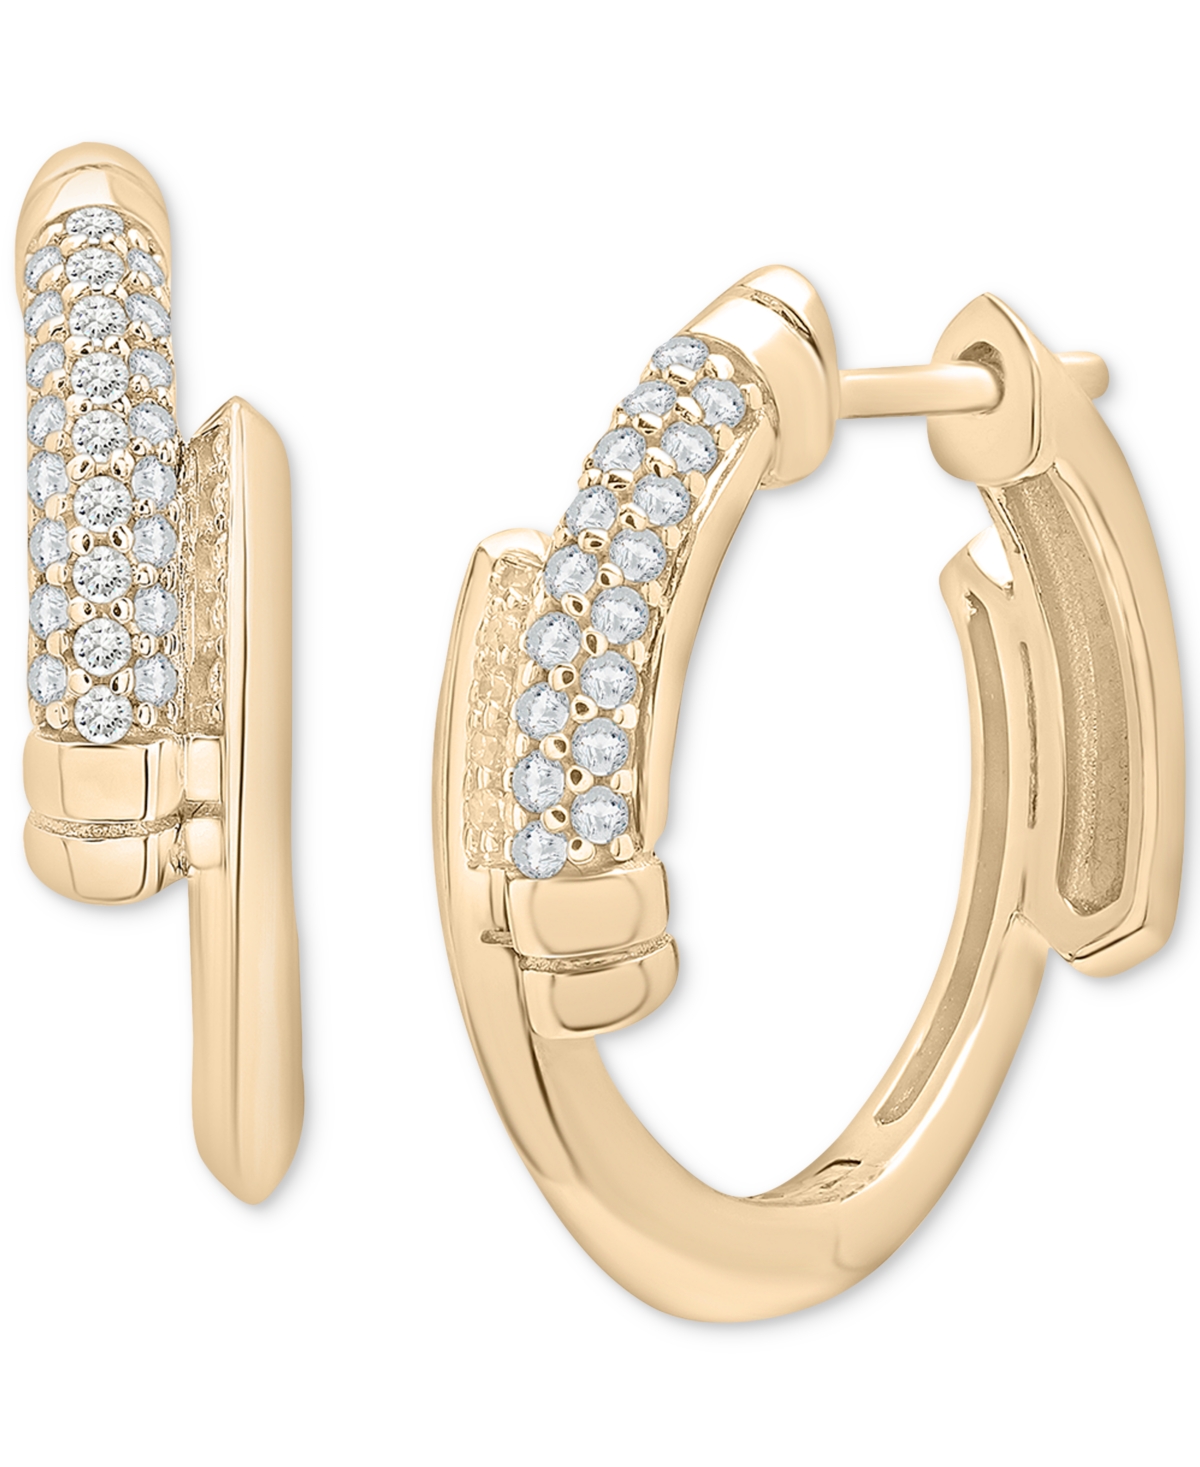 Diamond Small Hoop Earrings (1/6 ct. t.w.) in Gold Vermeil, Created for Macy's - Gold Vermeil